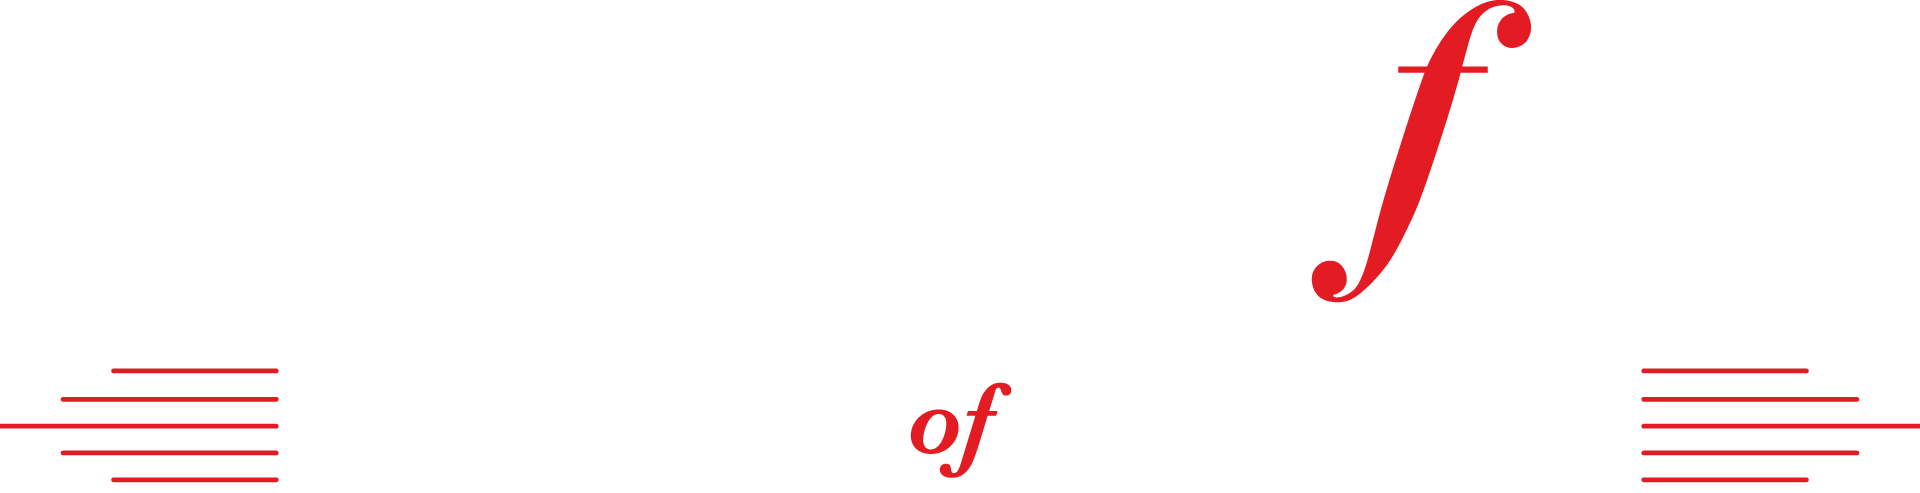 Vote for Phamie in the Classic FM Hall of Fame